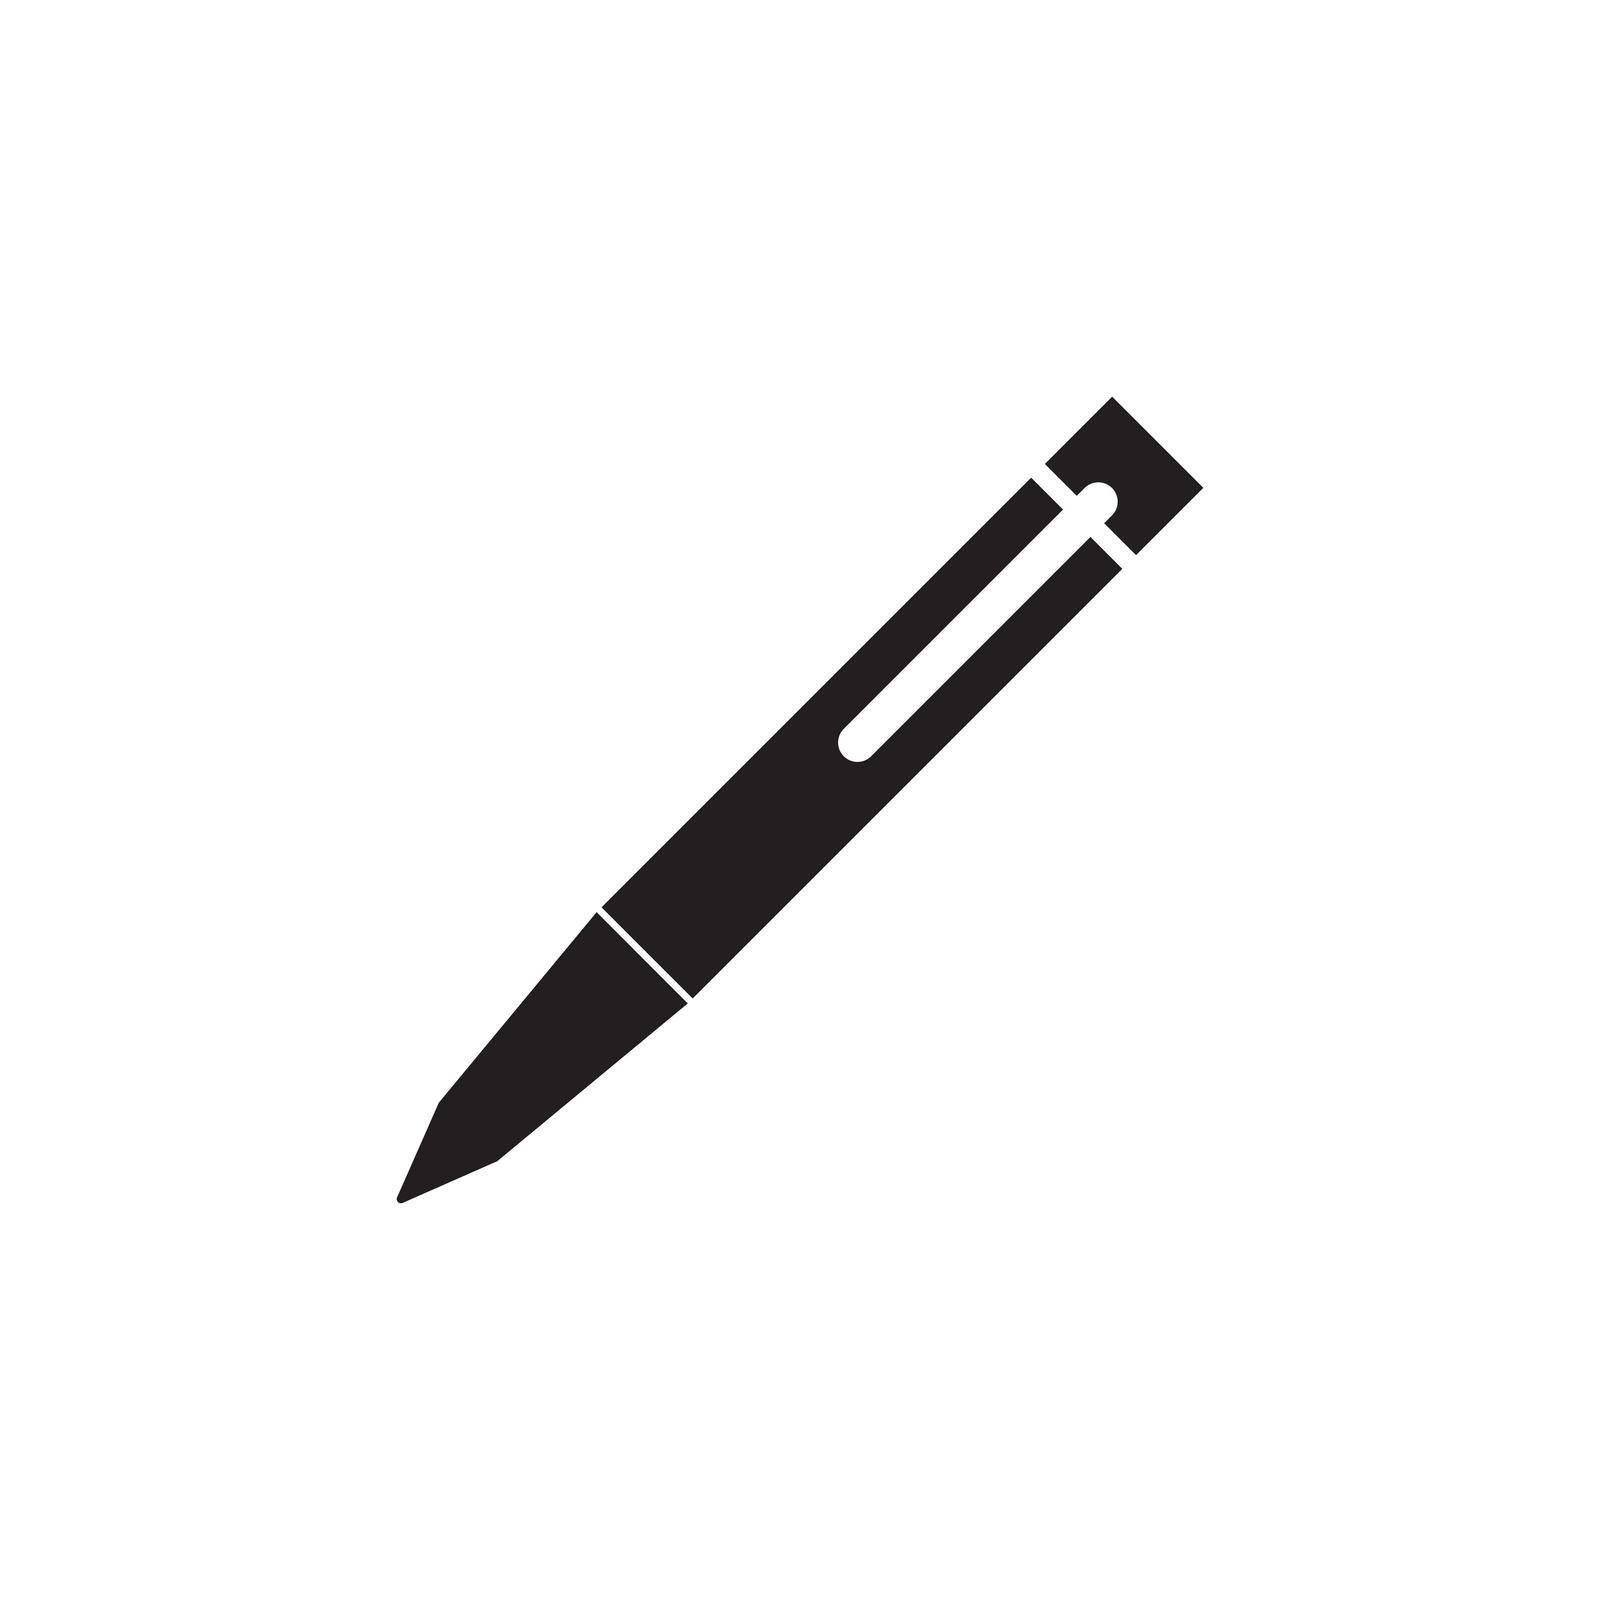 Pen icon vector illustration logo template for many purpose. Isolated on white background.